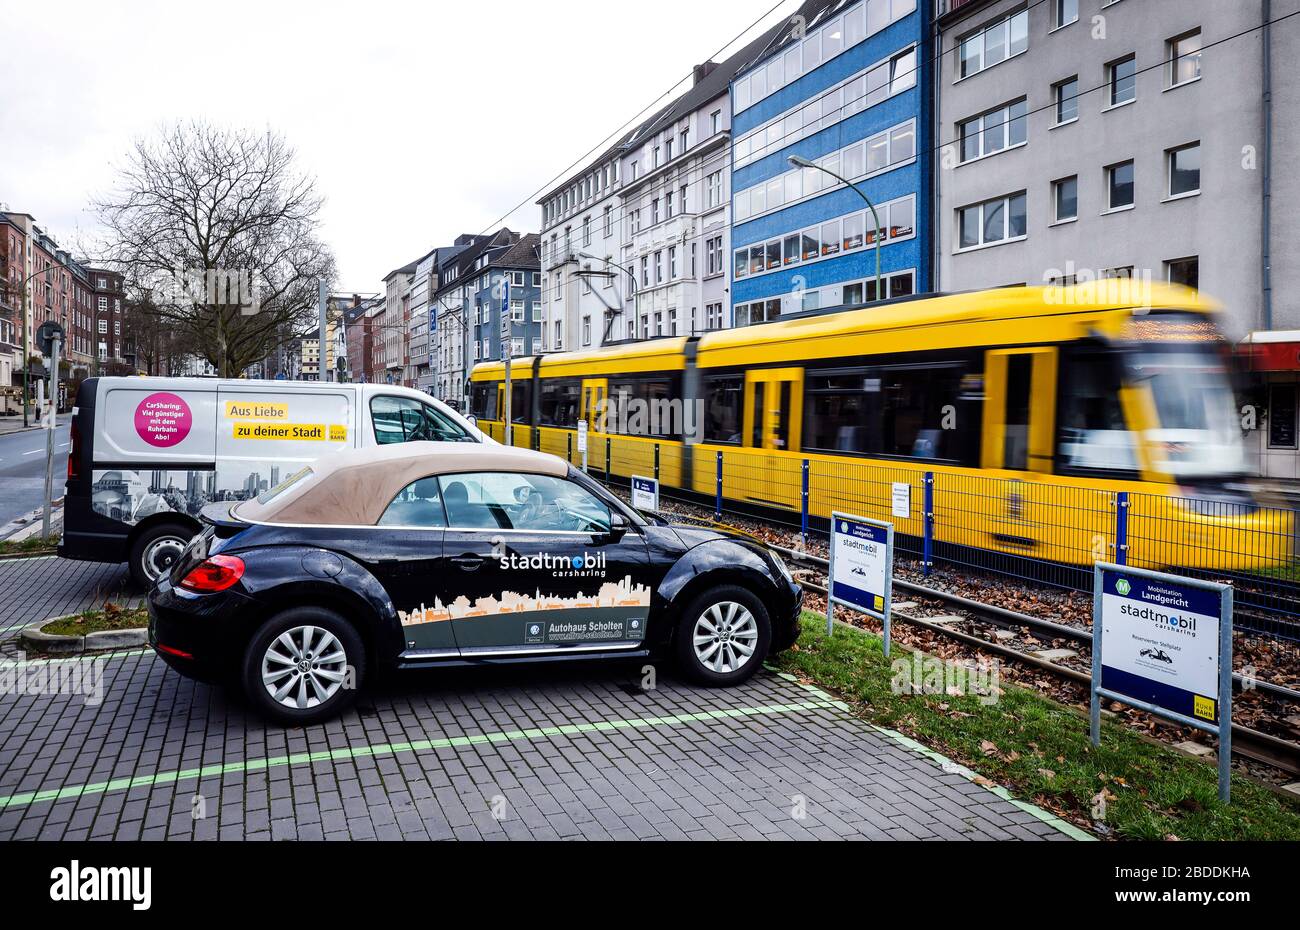 03.02.2020, Essen, North Rhine-Westphalia, Germany - A carsharing stadtmobil is located at the mobile station Landgericht, in the back a tram. 00X2002 Stock Photo